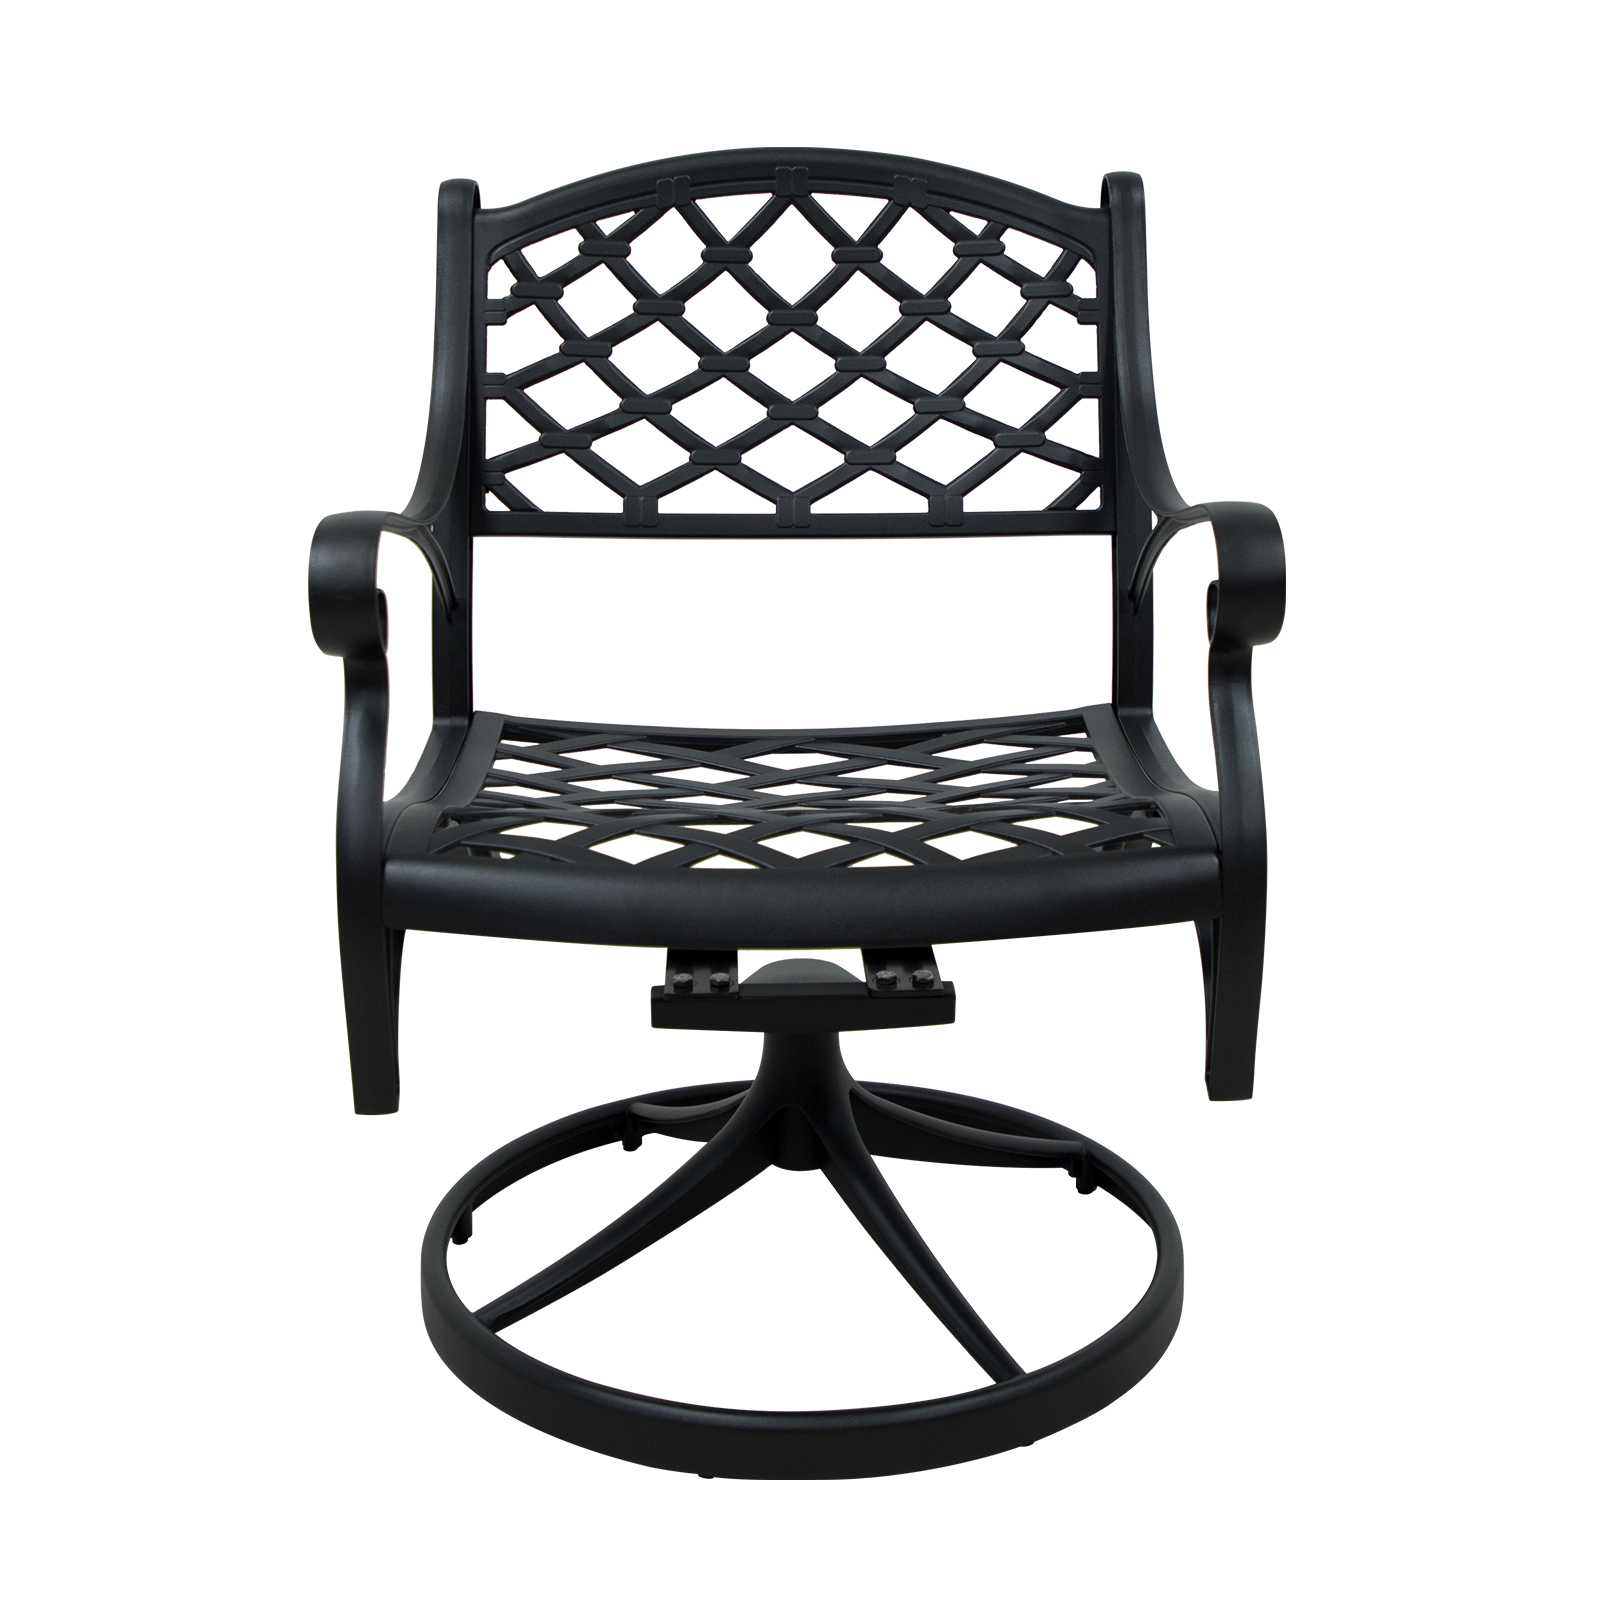 Outdoor Patio Swivel Dining Chair,Swivel Rocker Chairs with High Back Cast Aluminum Frame, Weather Resistant Metal Furniture for Lawn Backyard, Outdoor Dining Rocker Chair for Garden Backyard, Black - image 4 of 7